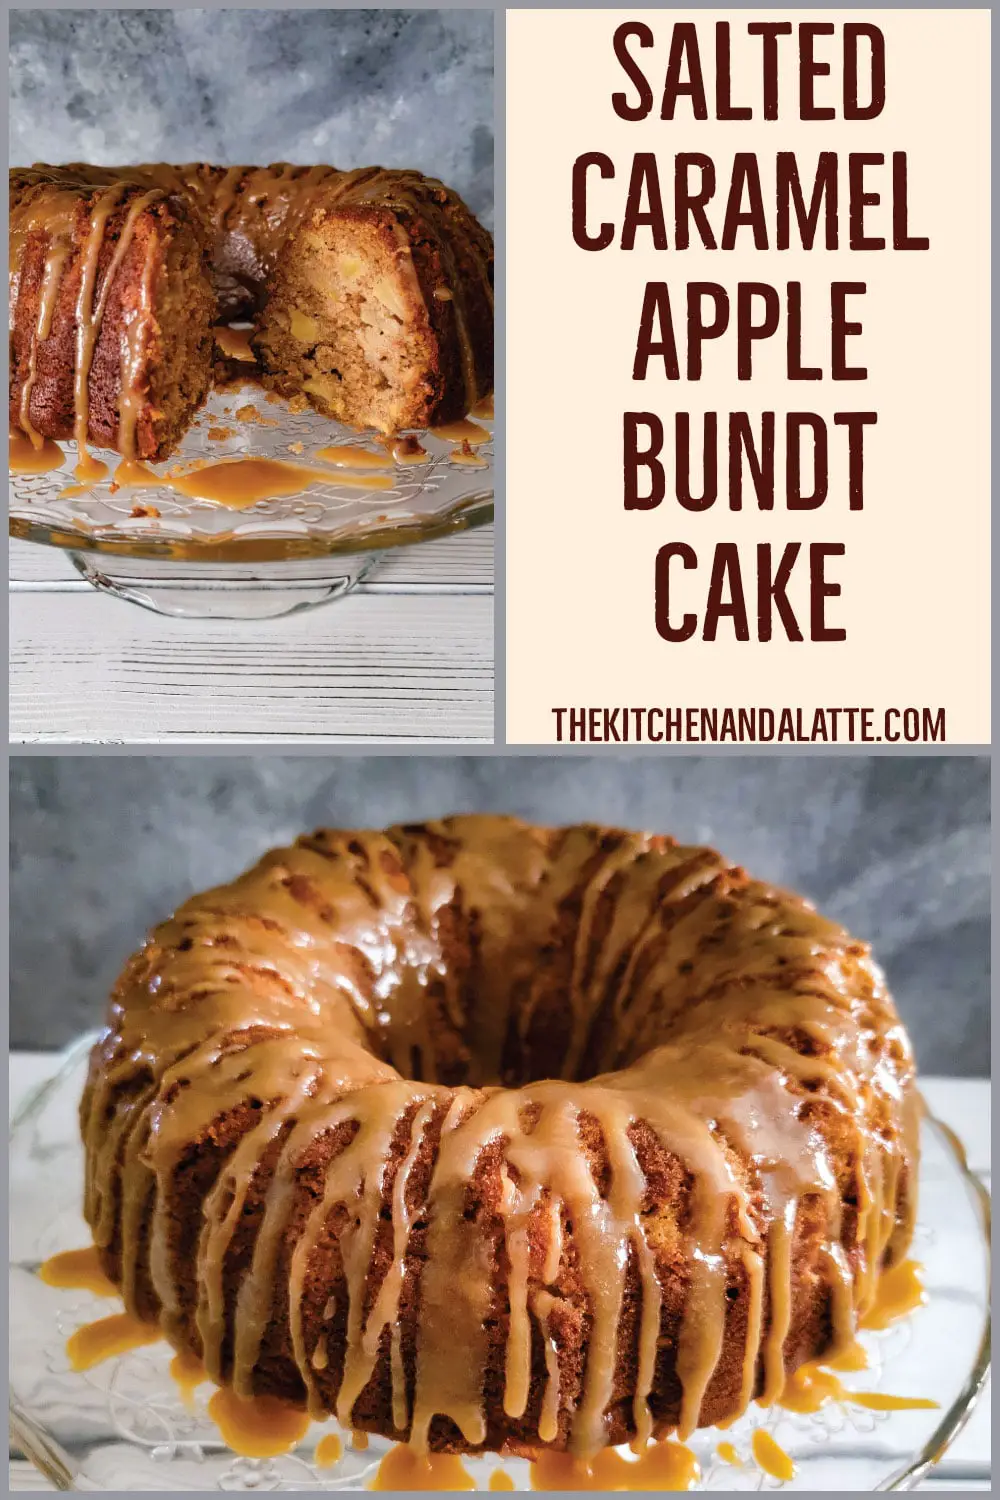 Salted Caramel Apple Bundt Cake Pinterest image. 2 pictures, both pictures are the apple cake on a cake plate with caramel drizzled over them ready to be served.